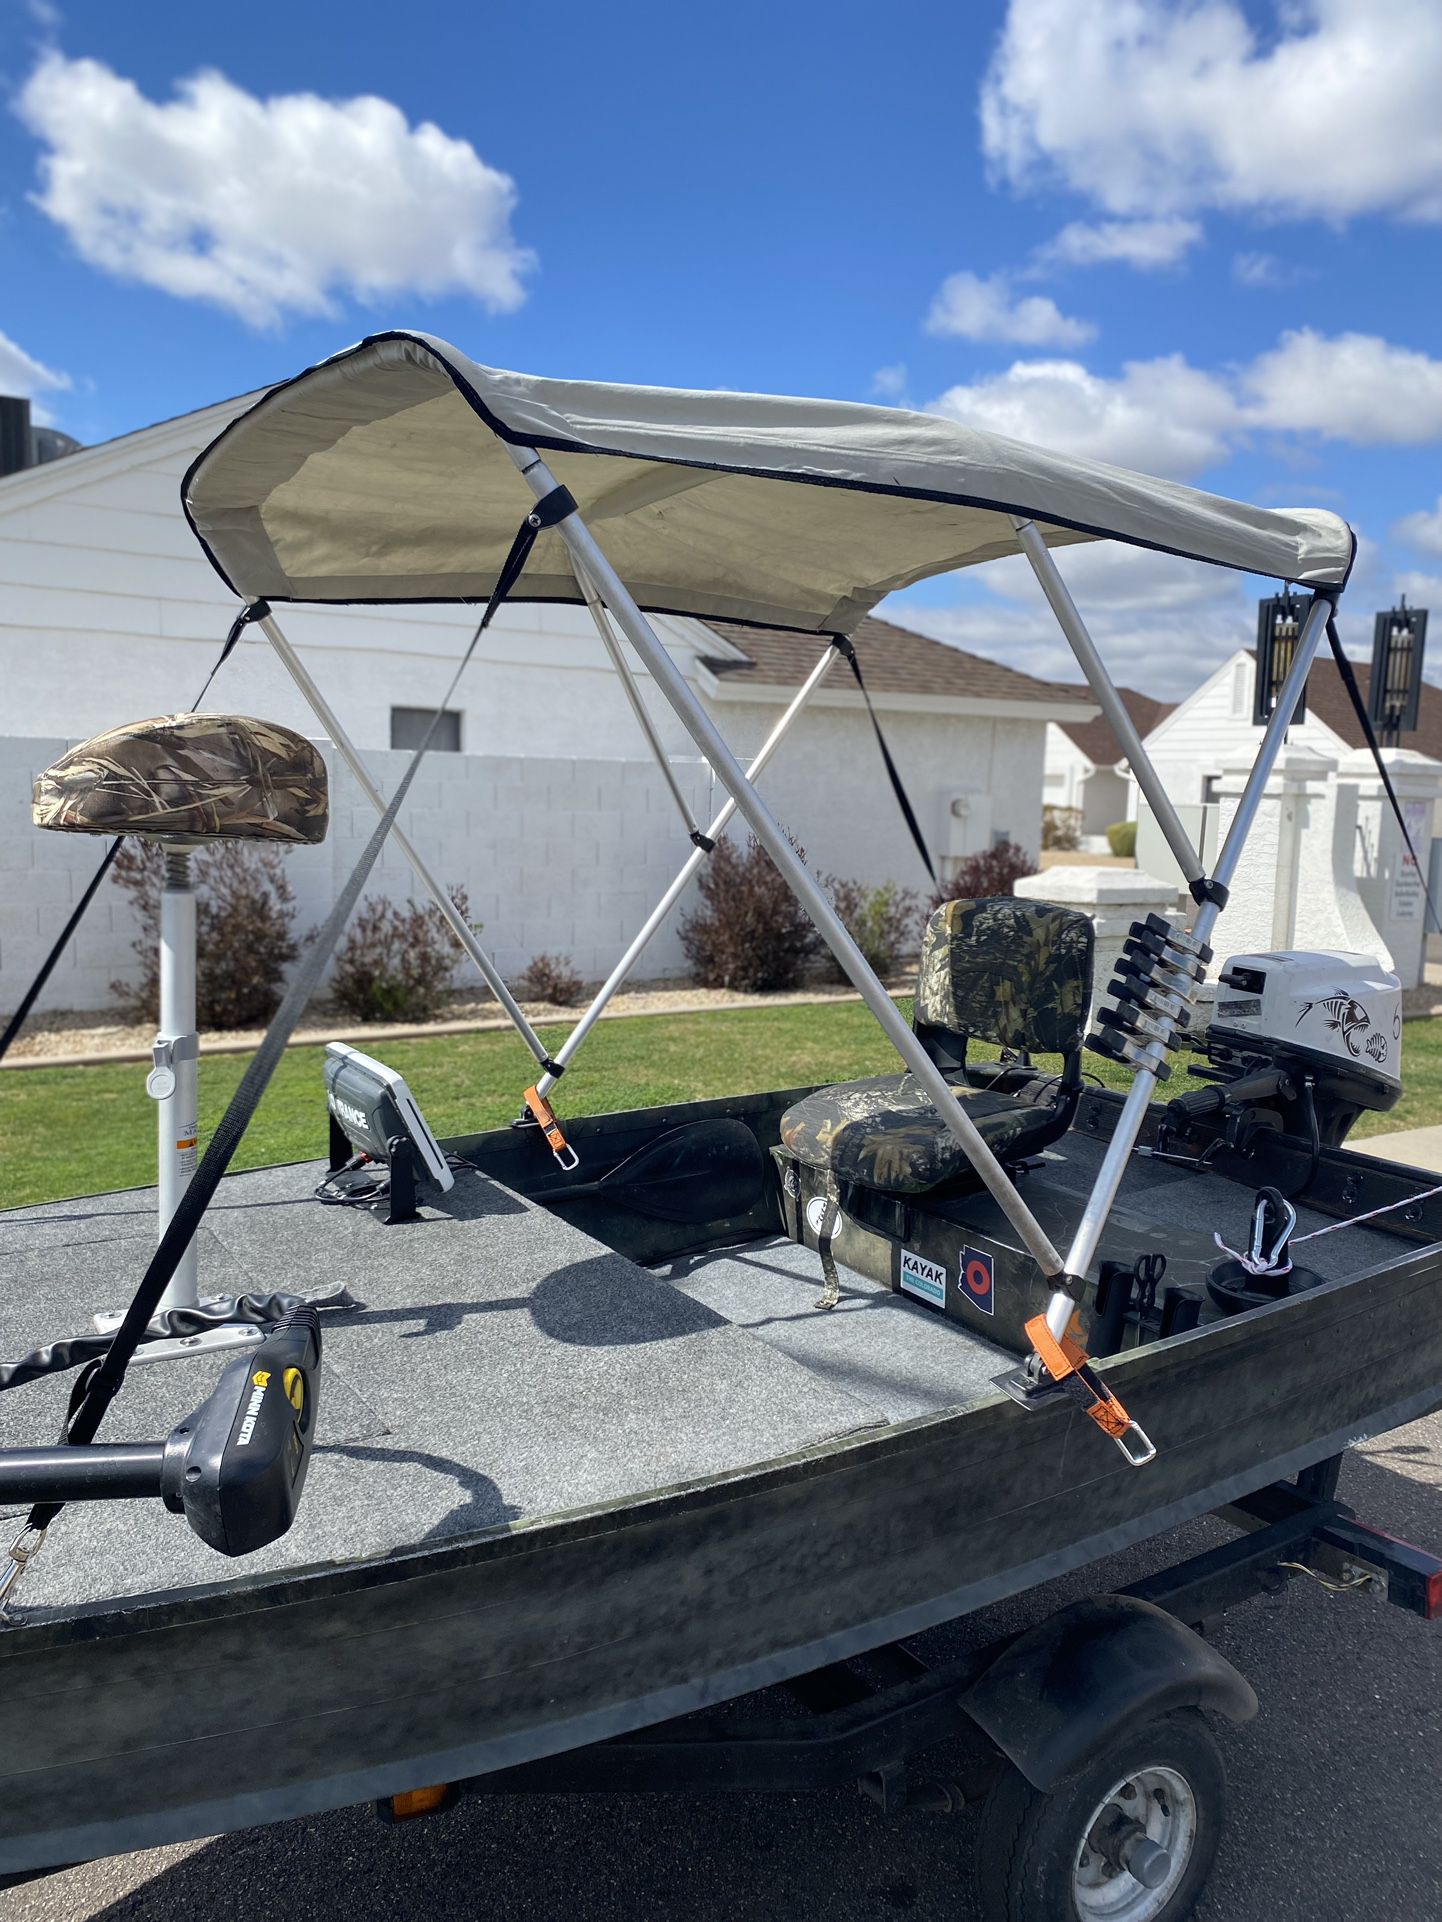 7.5HP OUTBOARD! CASTING DECK! SIDE&DOWN IMAGING! 55LBS THRUST TROLLEY MOTOR! PLENTY OF STORAGE! GARAGE KEPT! FOREVER TAGS!